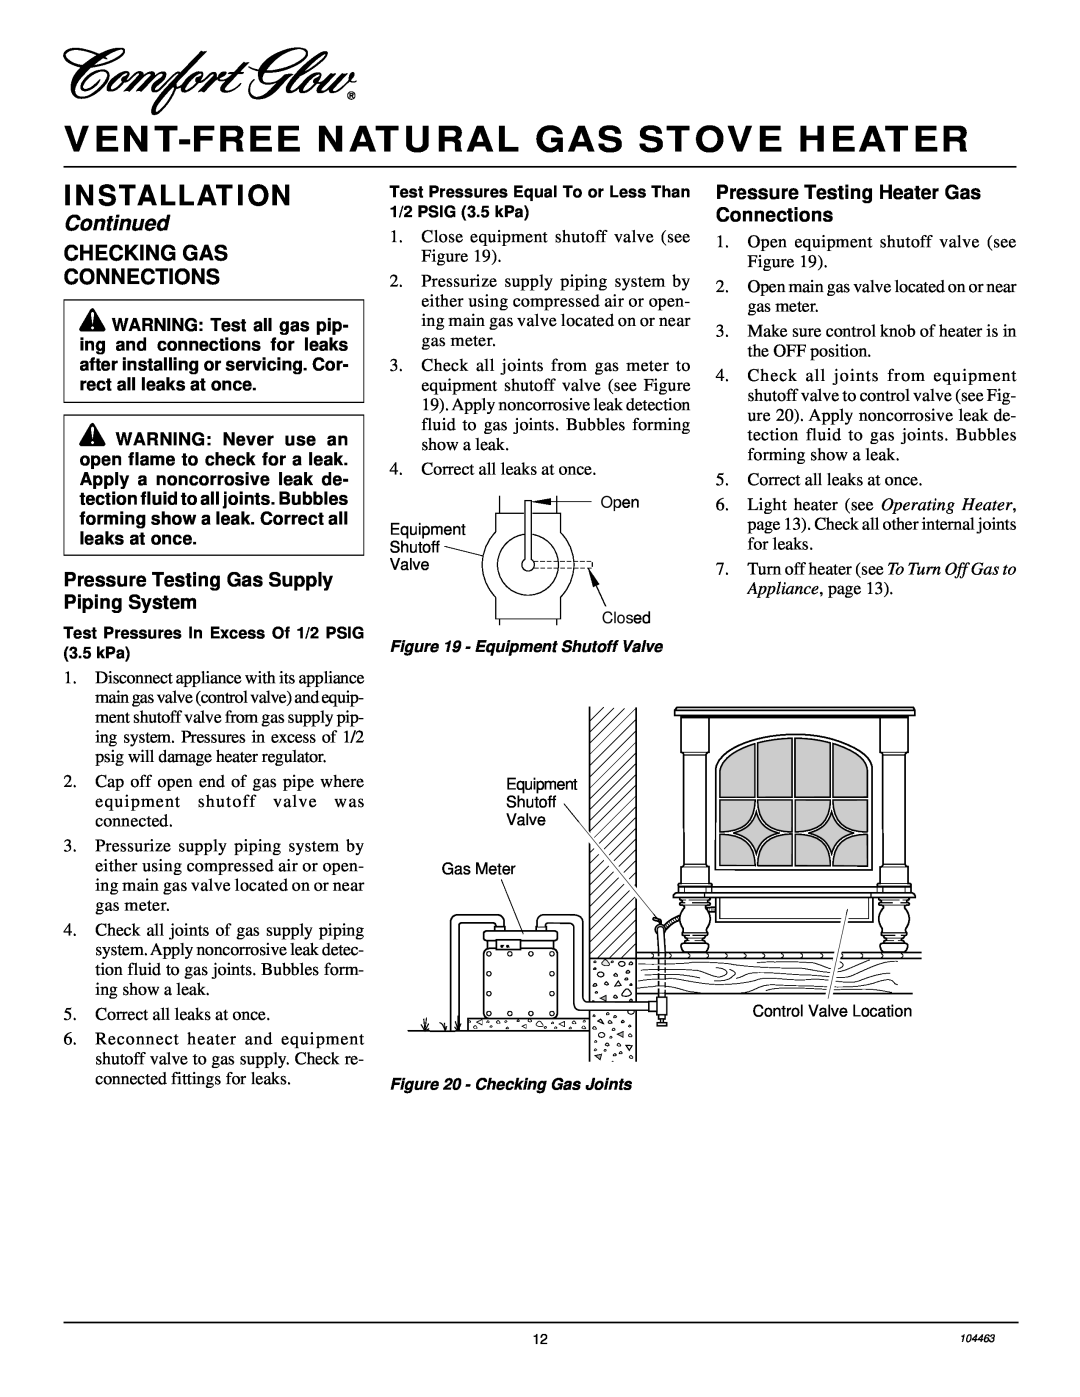 Desa Tech SL30NT installation manual Vent-Freenatural Gas Stove Heater, Installation, Continued, Checking Gas Connections 